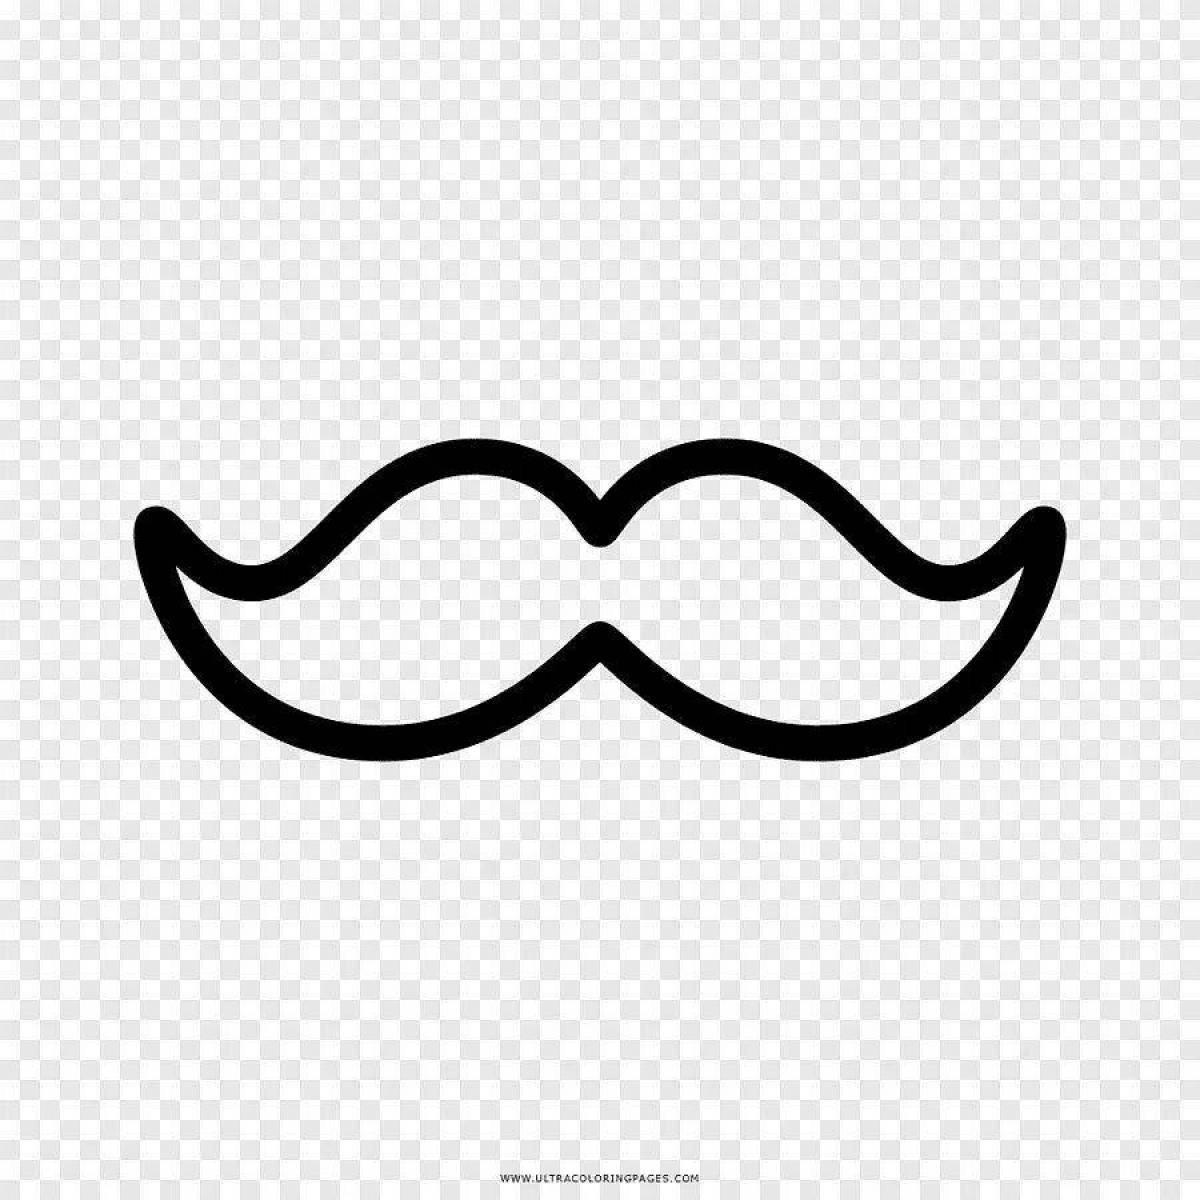 Coloring pages with a mustache for children